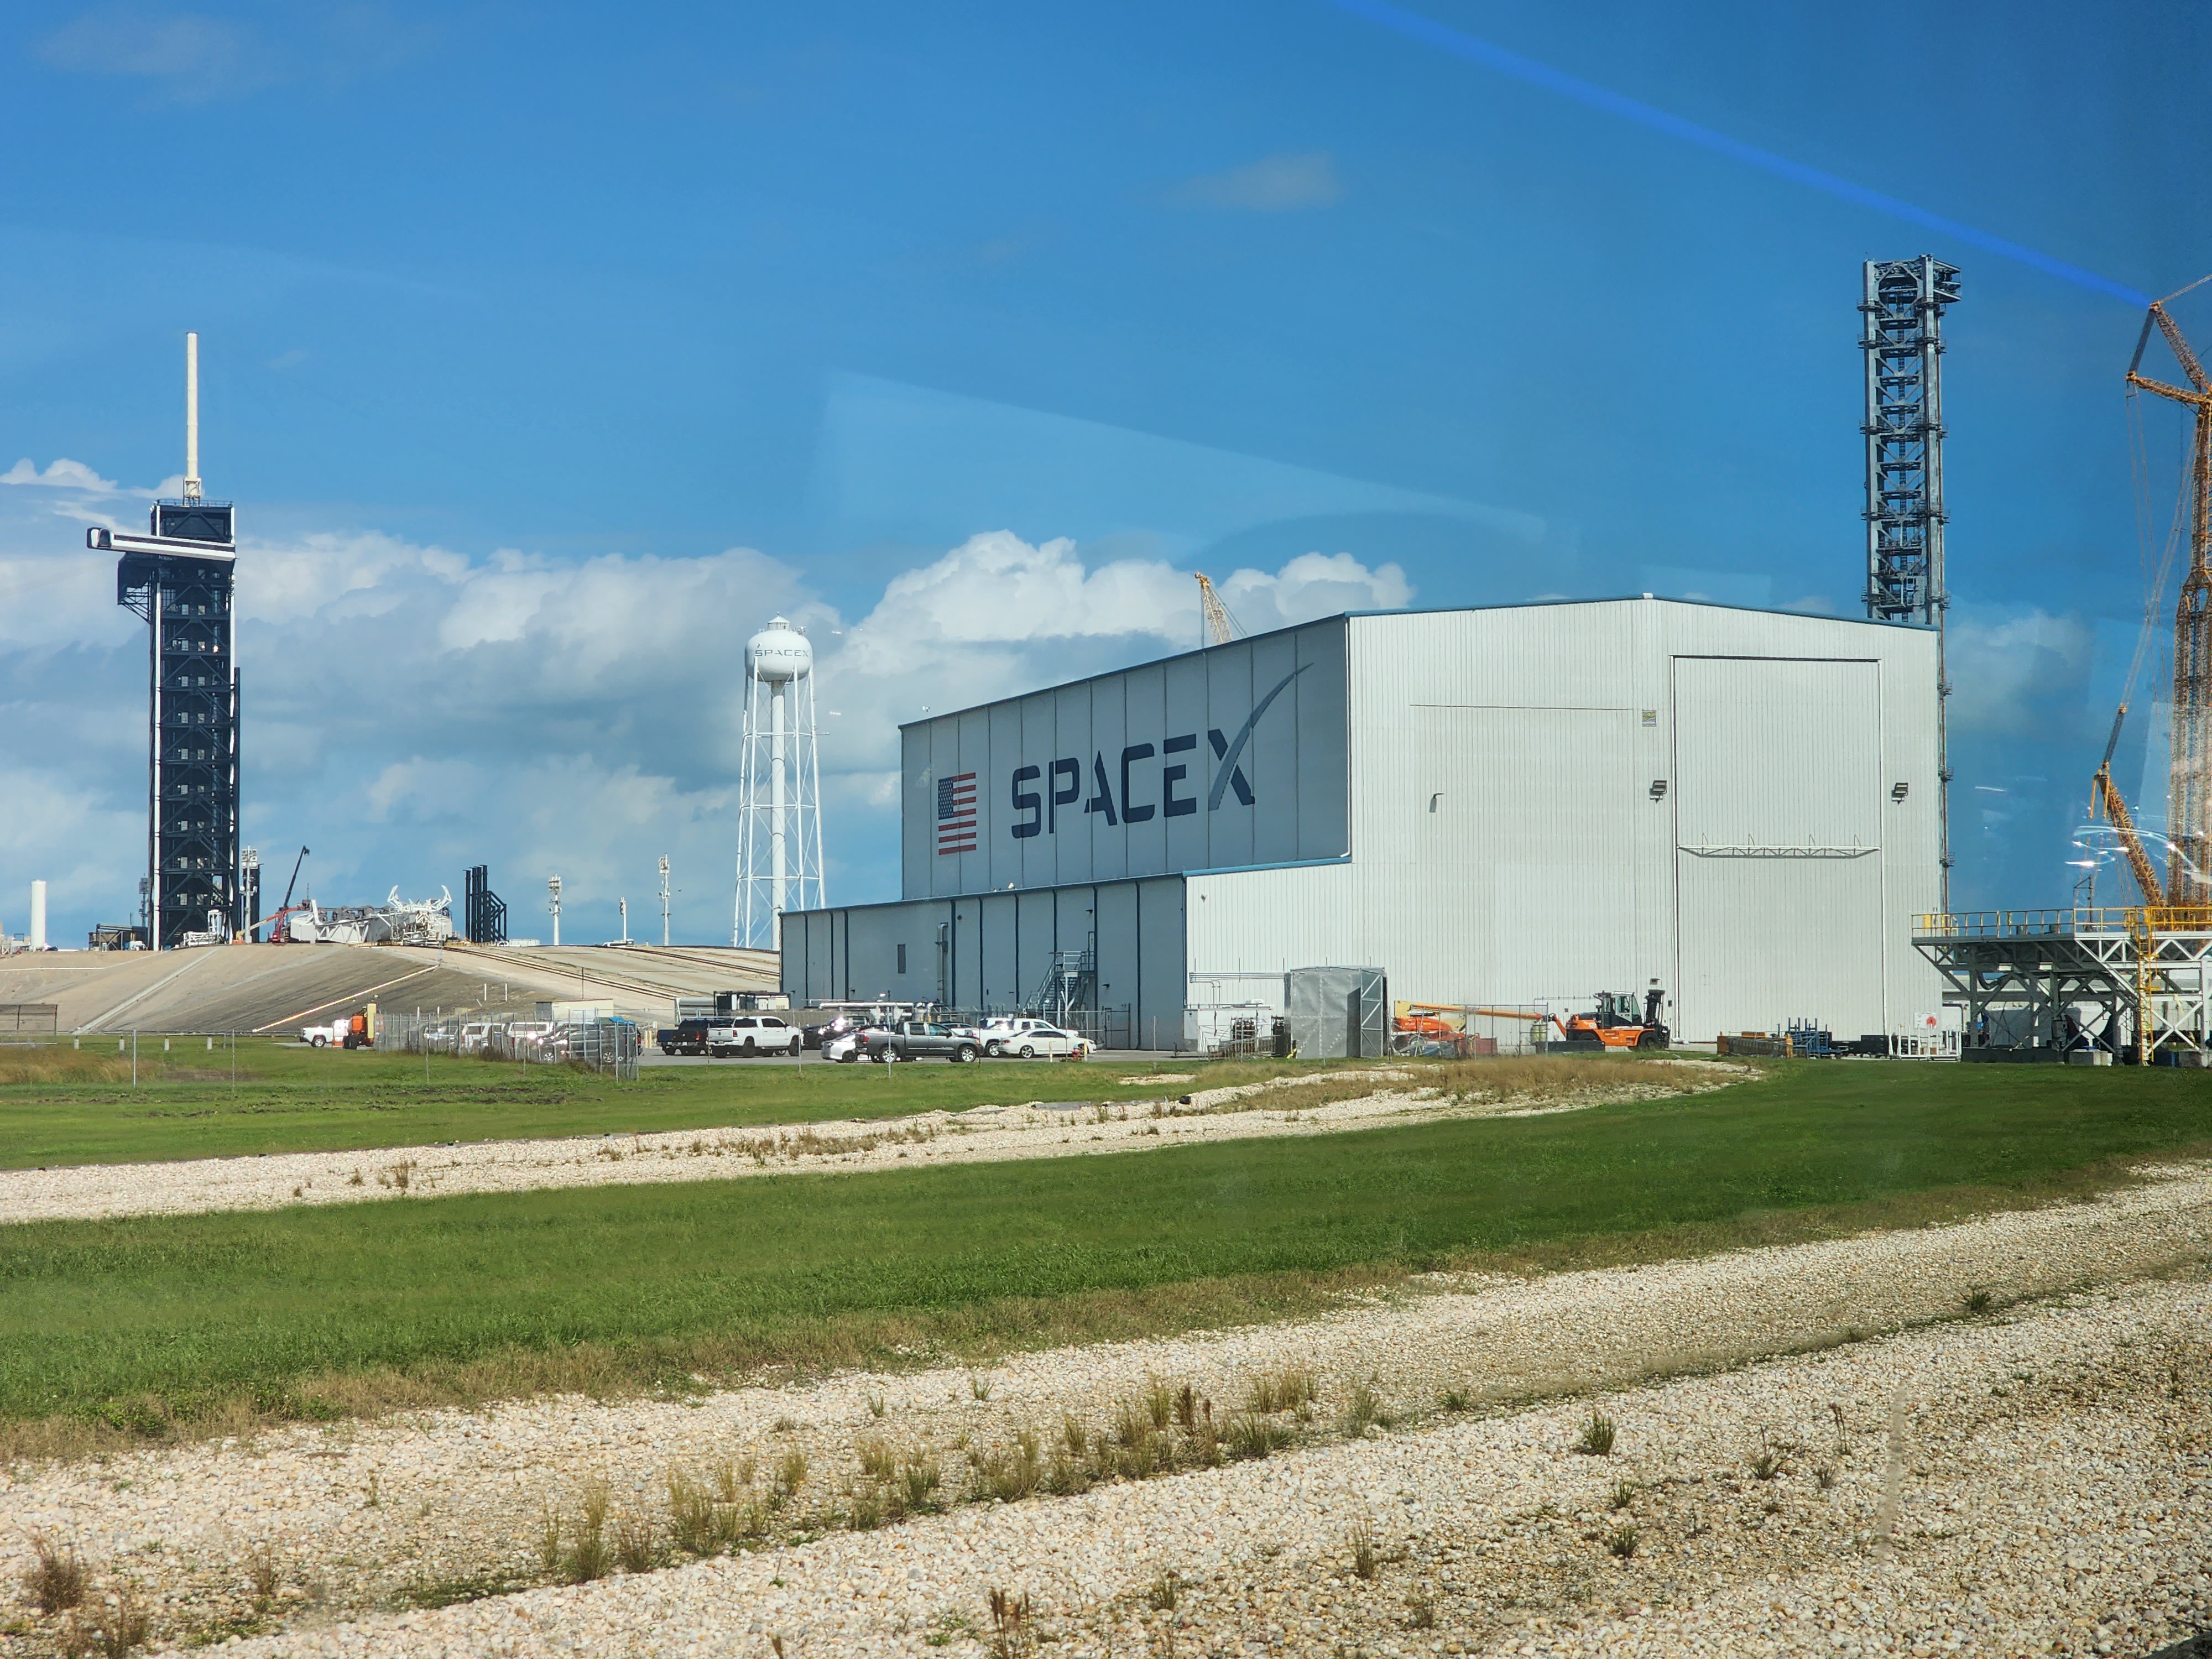 SpaceX facility in Florida pictured during a sunny day.